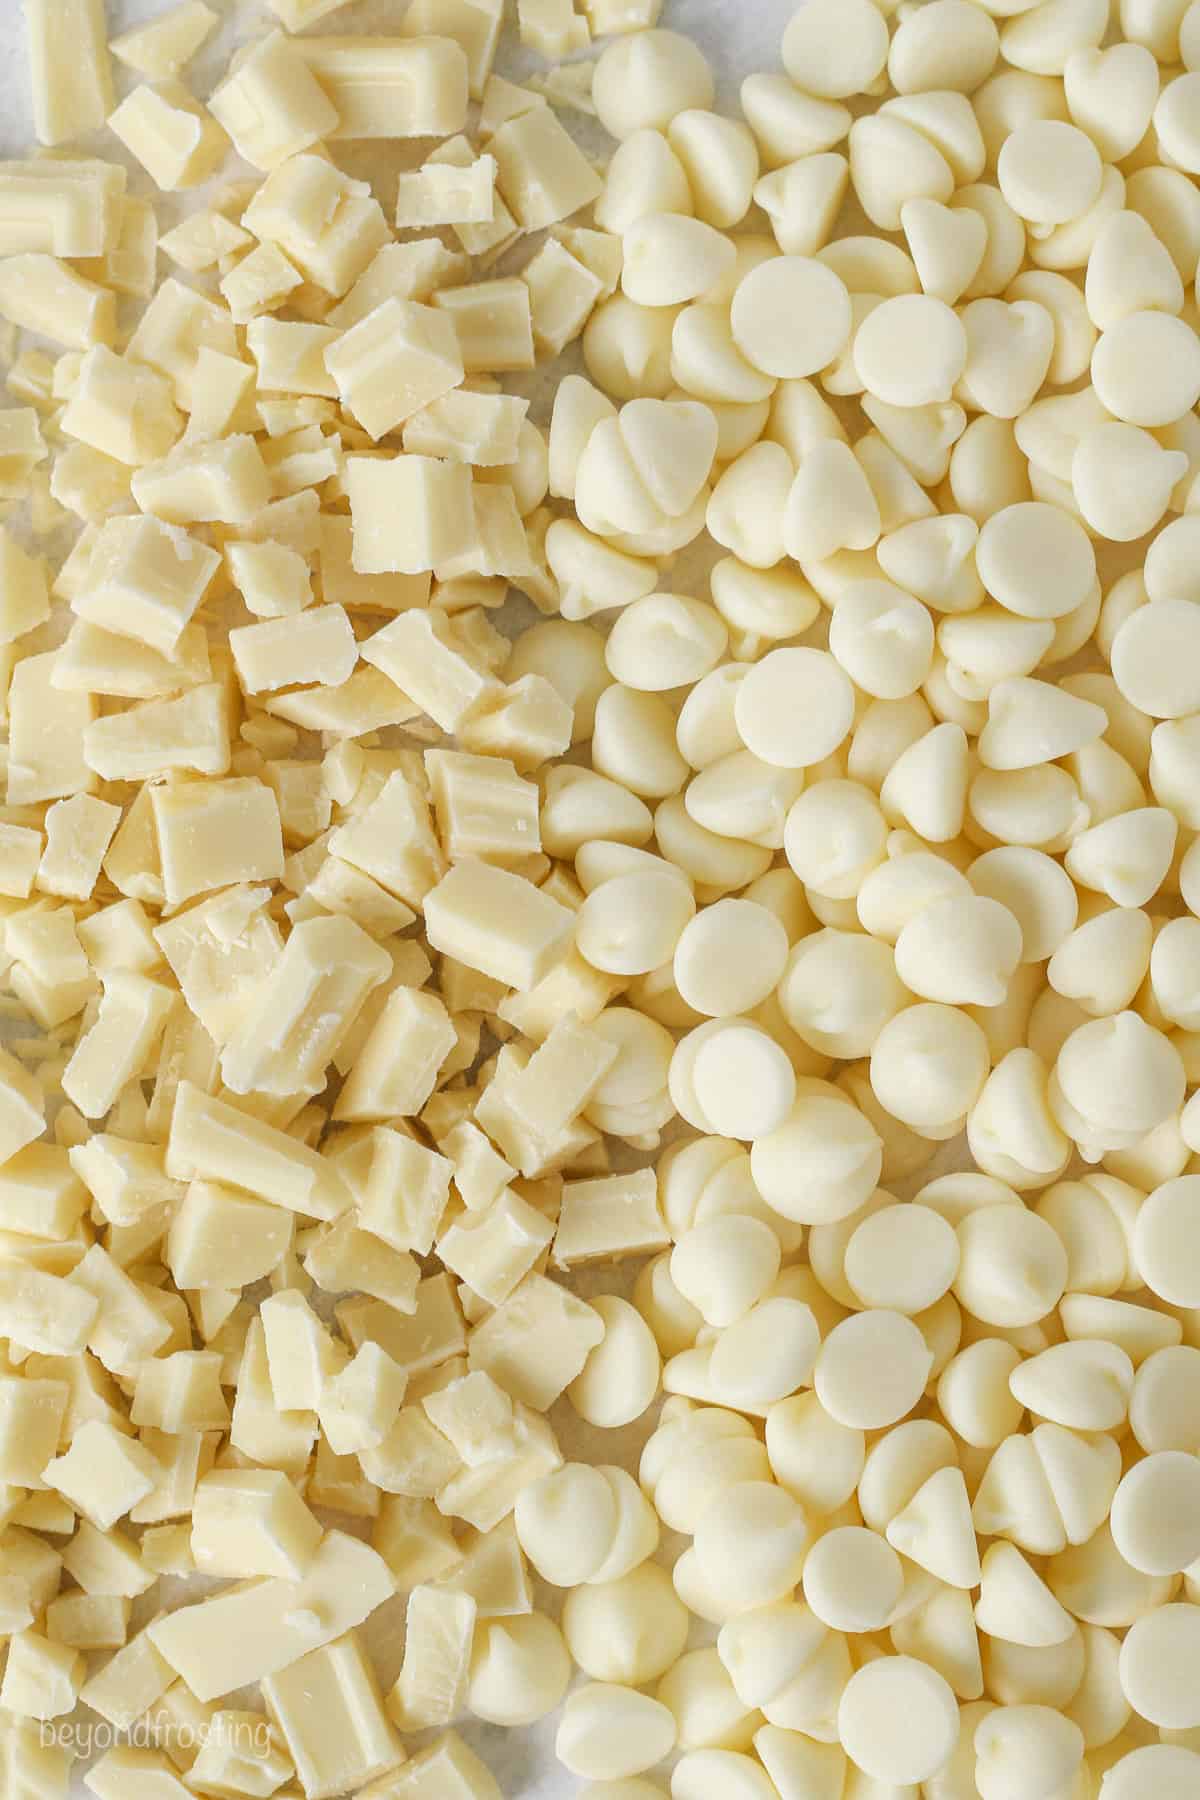 Close up view of white chocolate chips next to chopped white chocolate pieces.